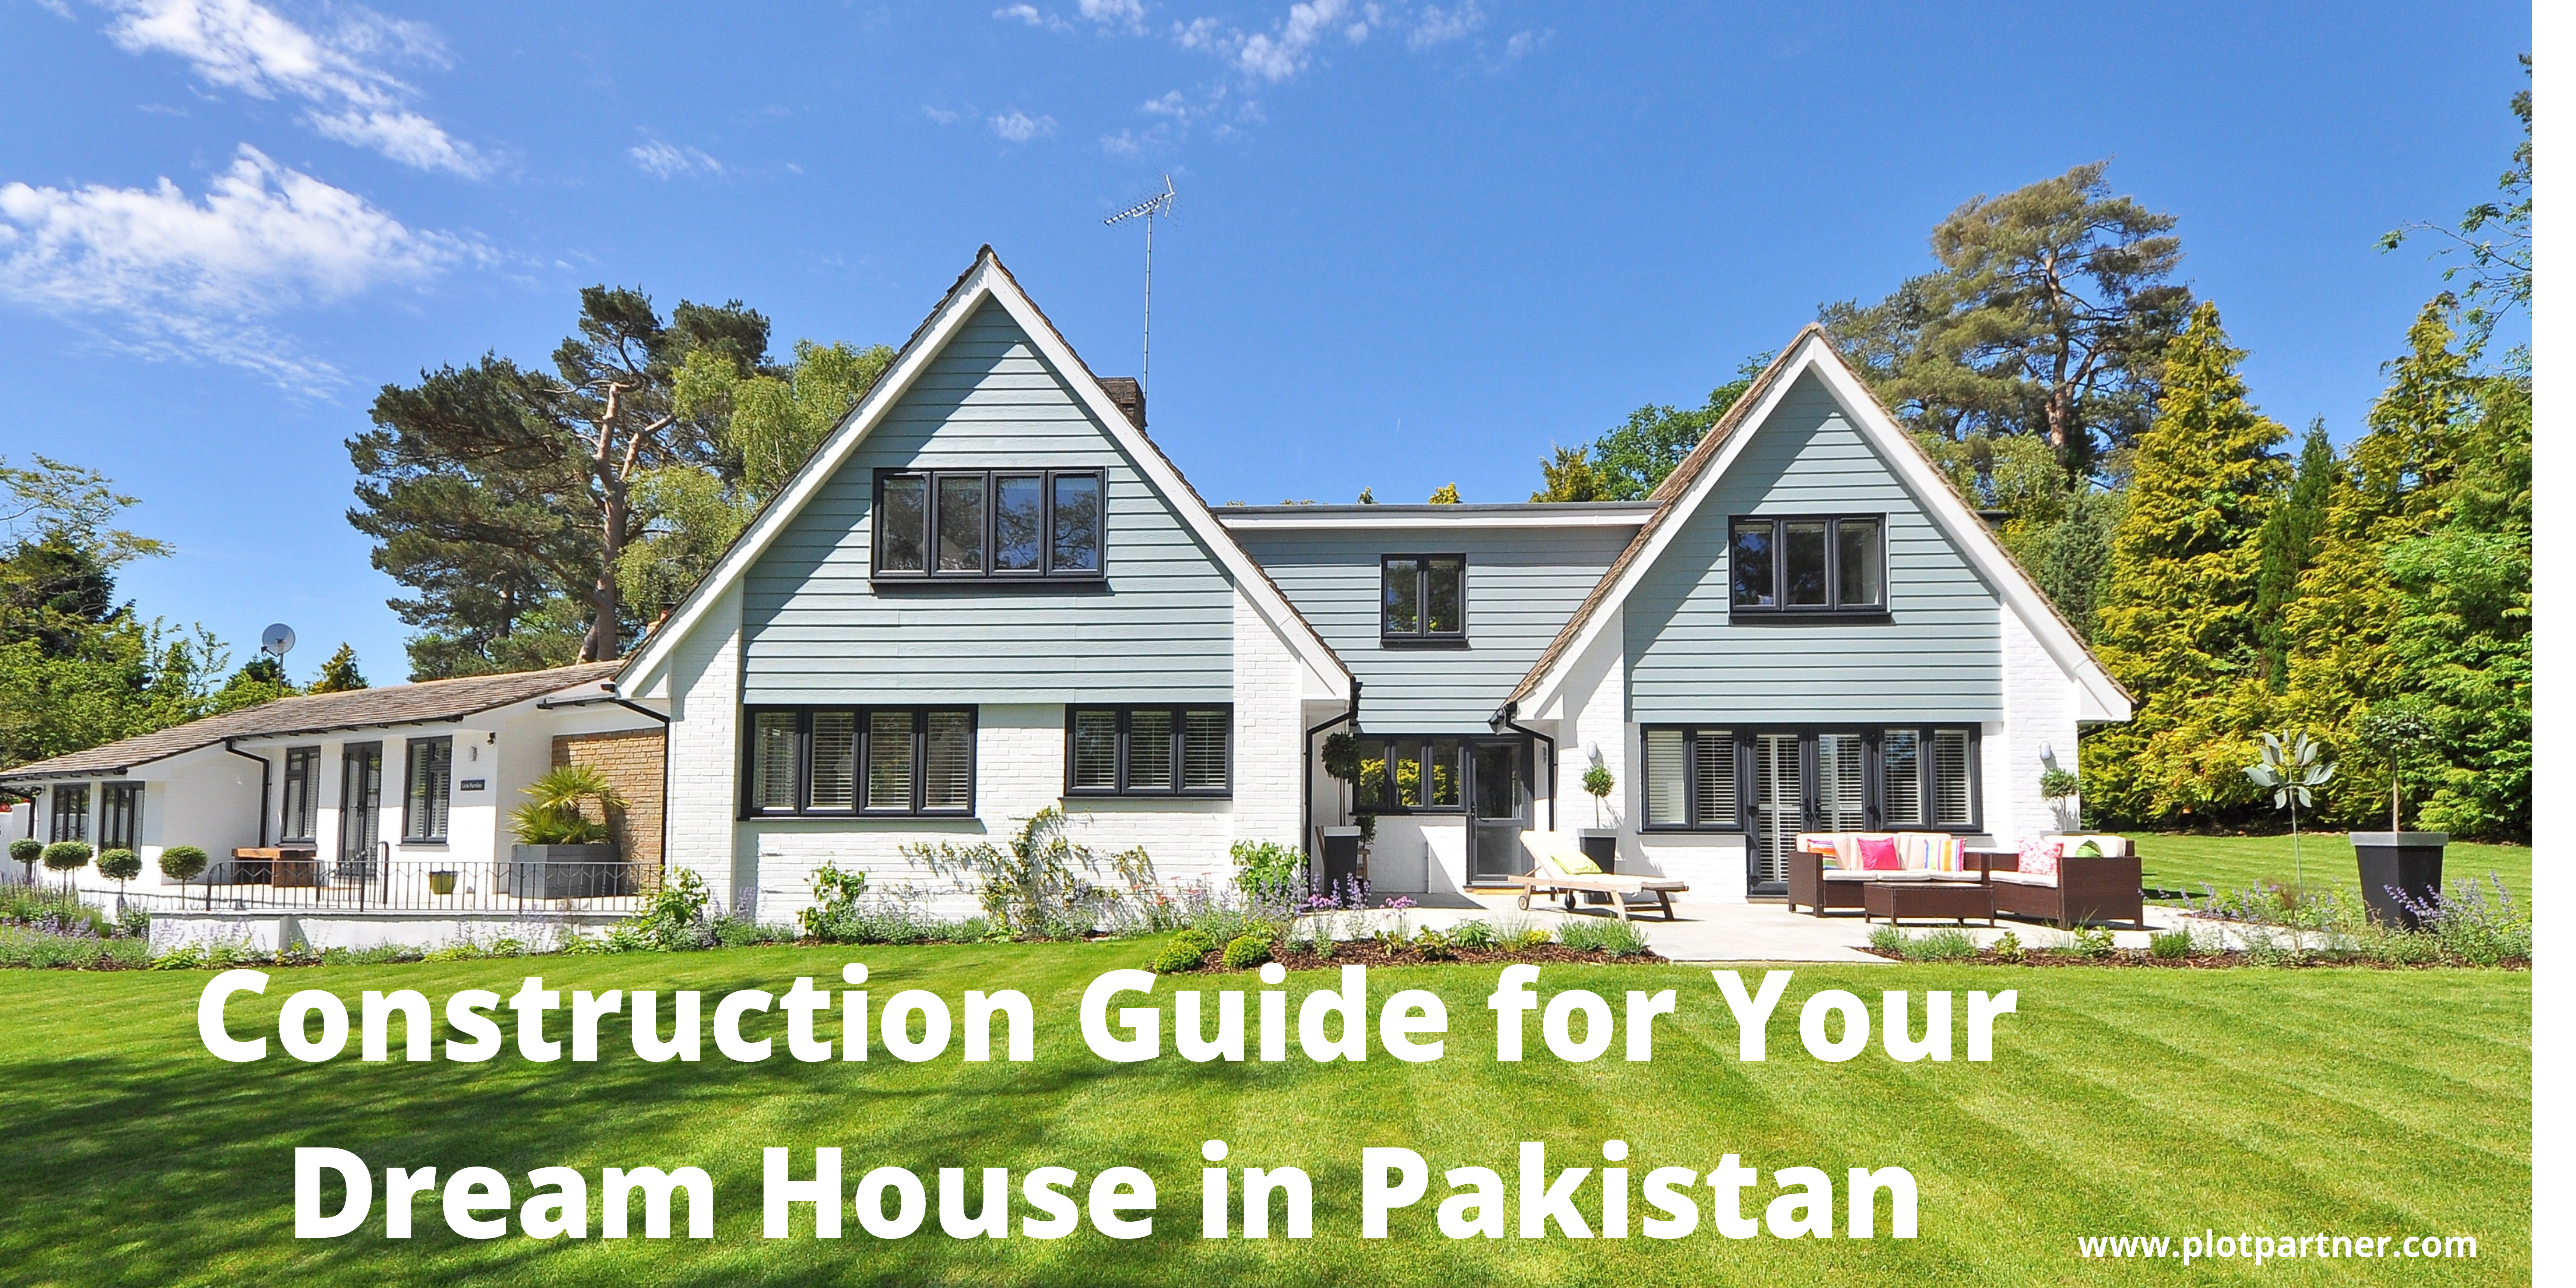 Construction Guide for Your Dream House in Pakistan